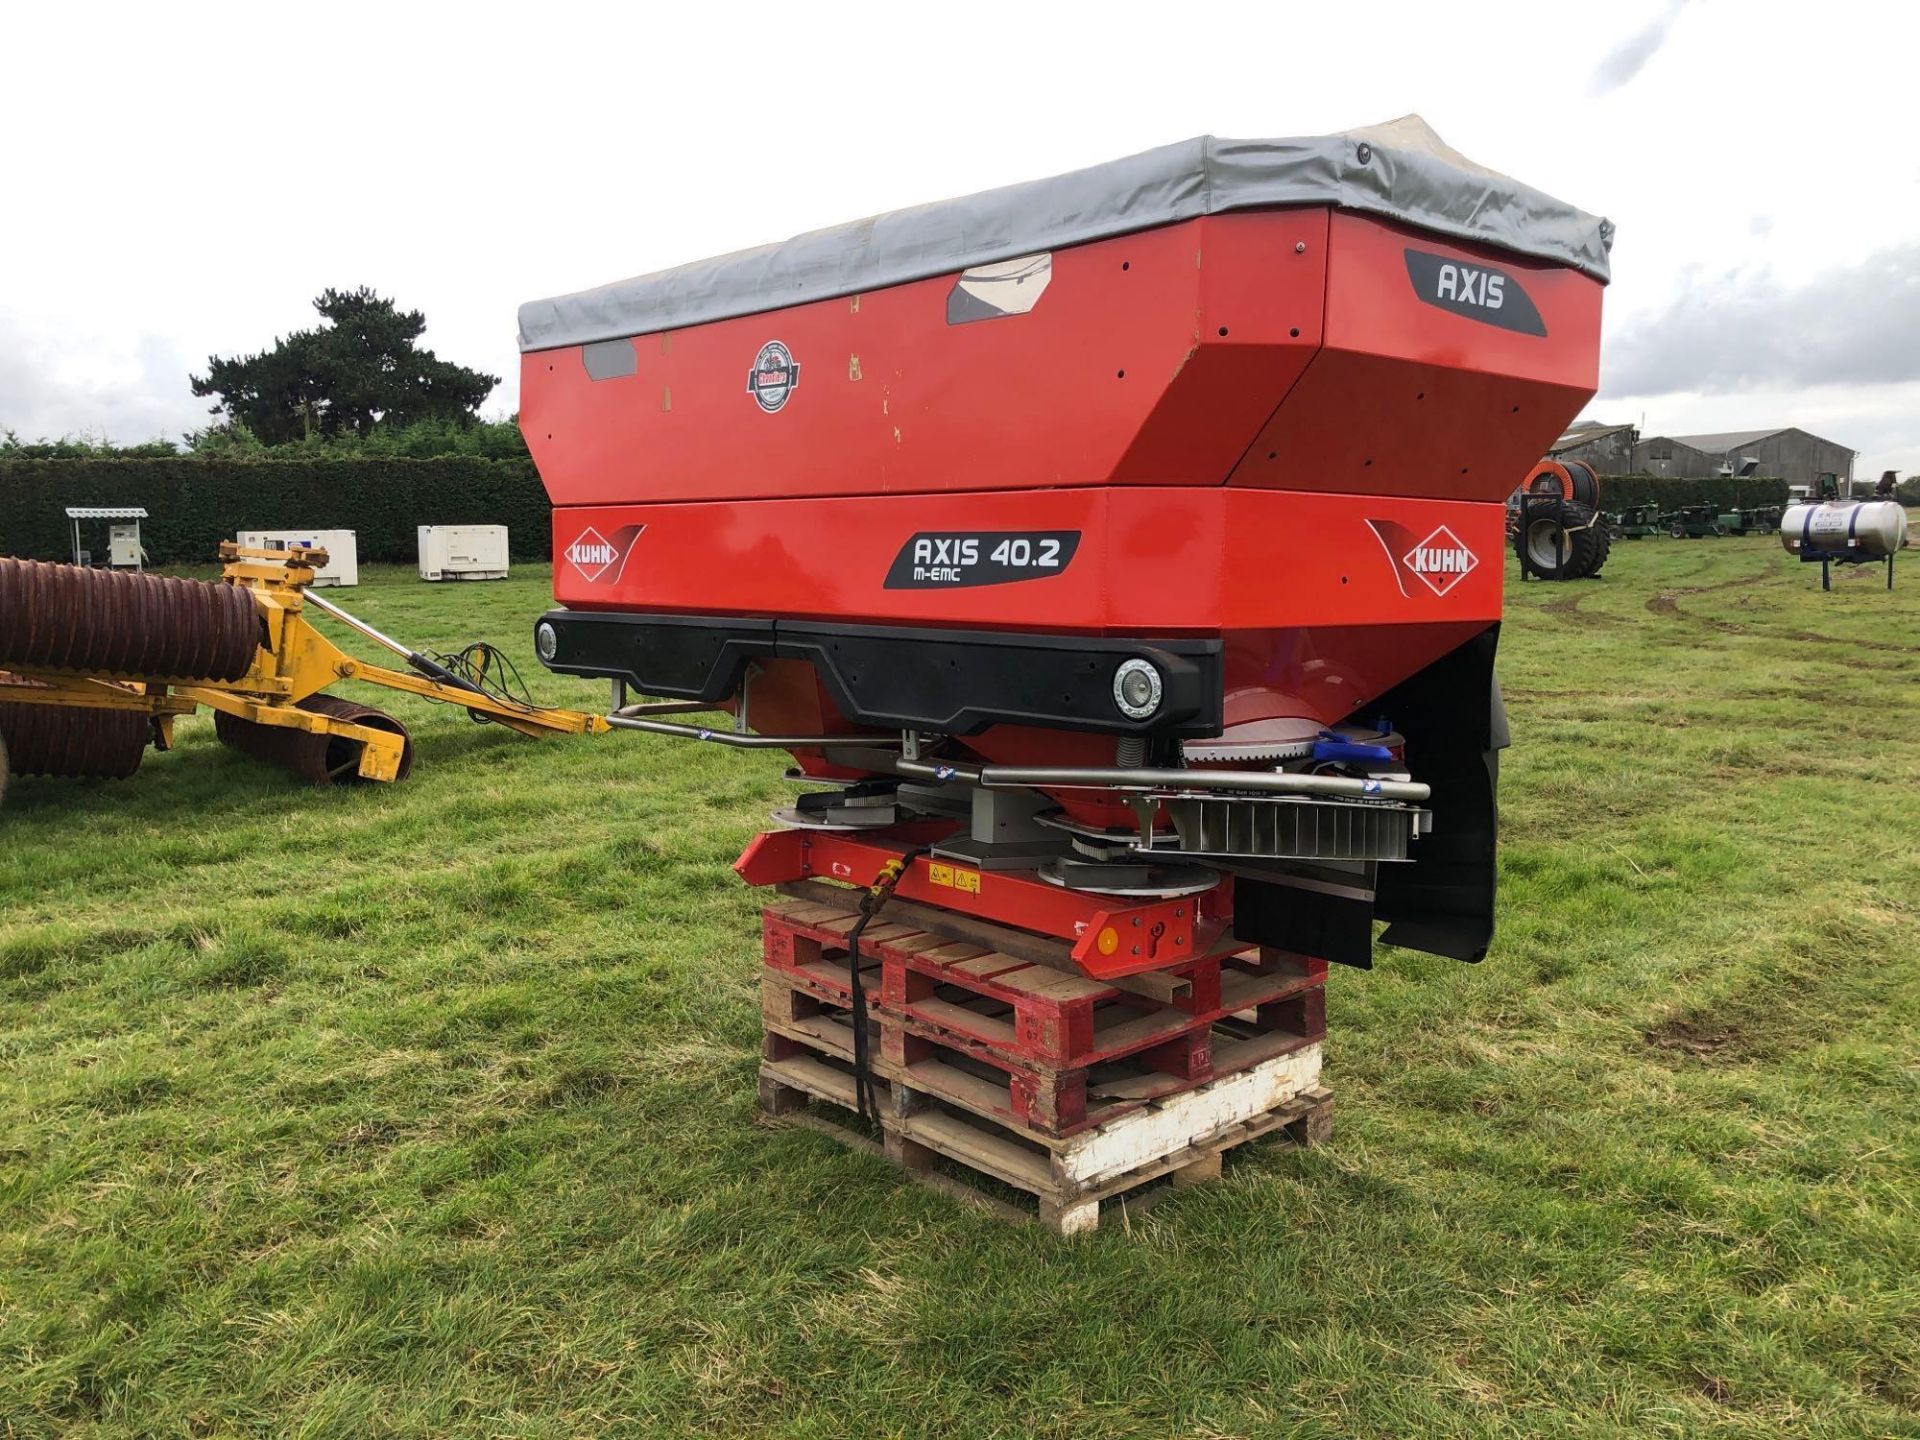 2016 Kuhn Axis-M 40.2 EMC 36m twin disc fertiliser spreader with border control. Serial No: 09-04626 - Image 12 of 13